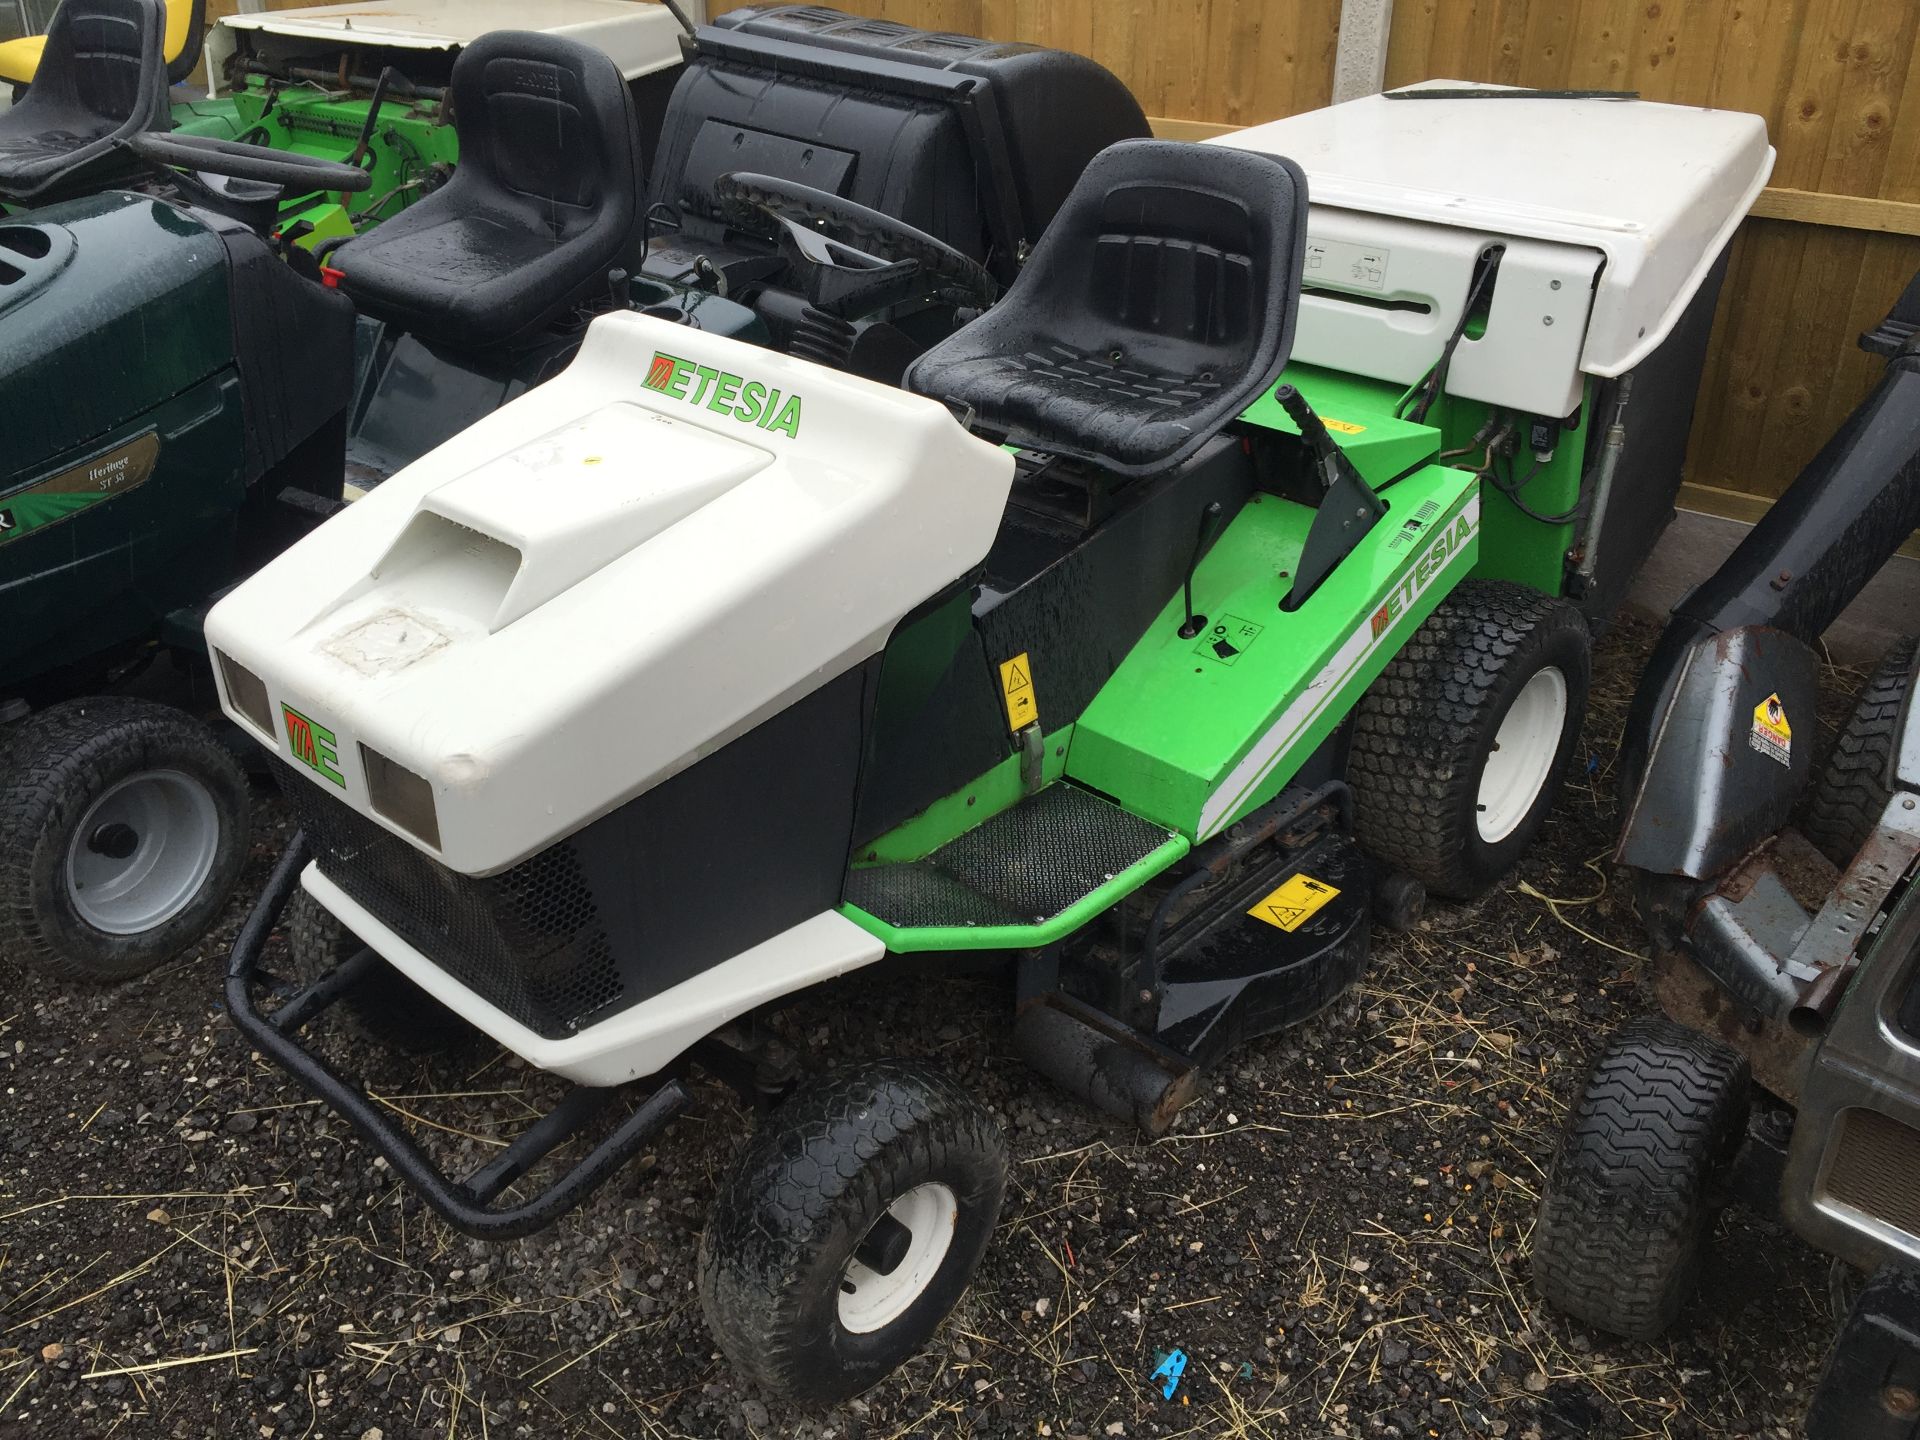 ETESIA COMMERCIAL RIDE ON MOWER